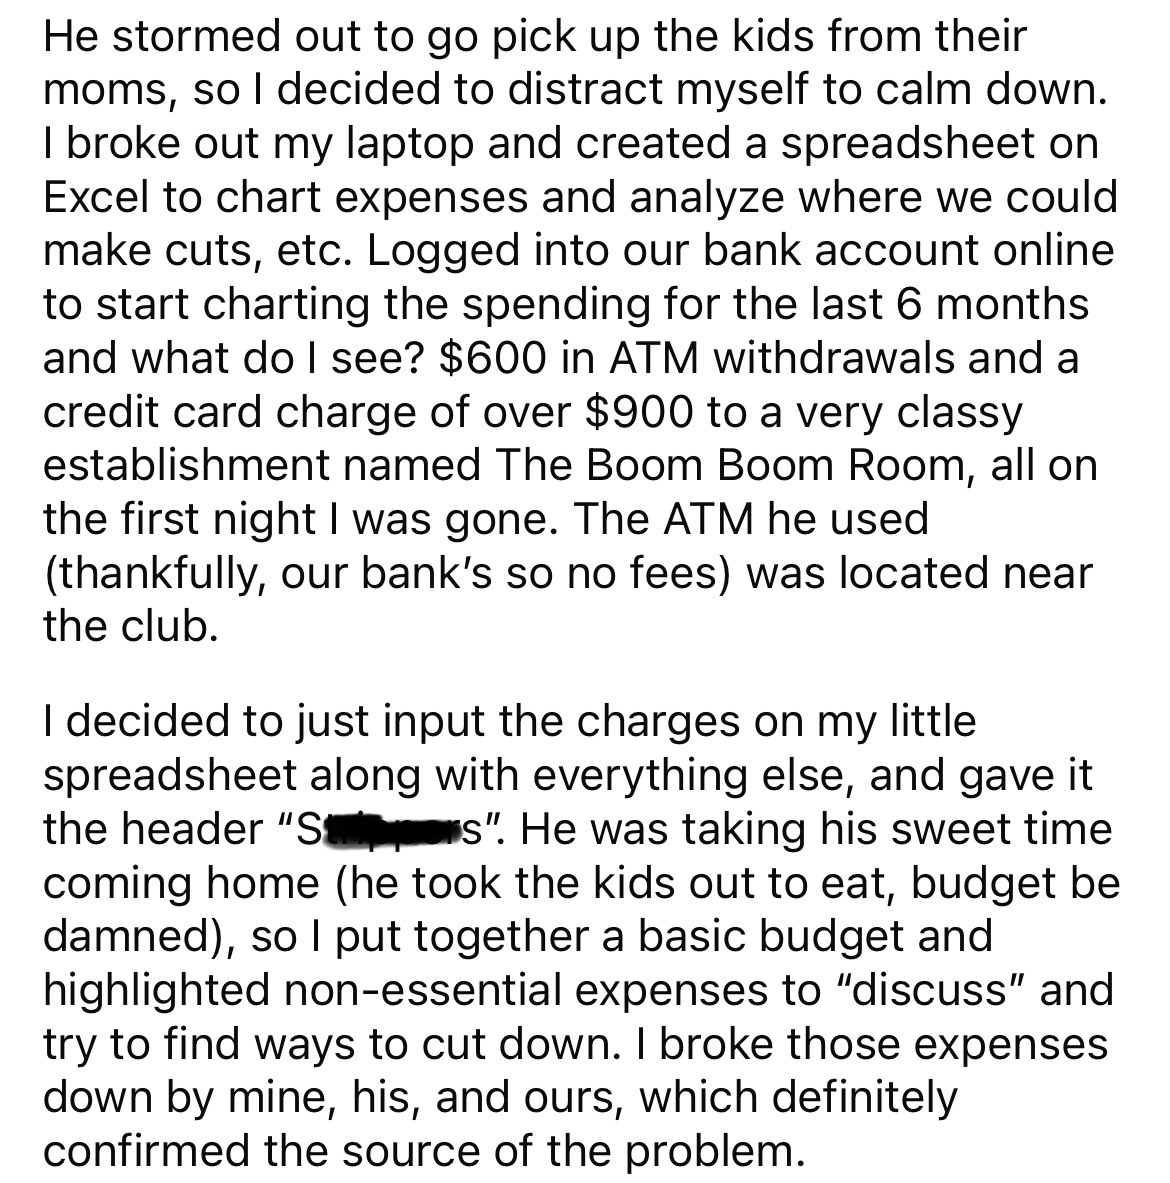 angle - He stormed out to go pick up the kids from their moms, so I decided to distract myself to calm down. I broke out my laptop and created a spreadsheet on Excel to chart expenses and analyze where we could make cuts, etc. Logged into our bank account